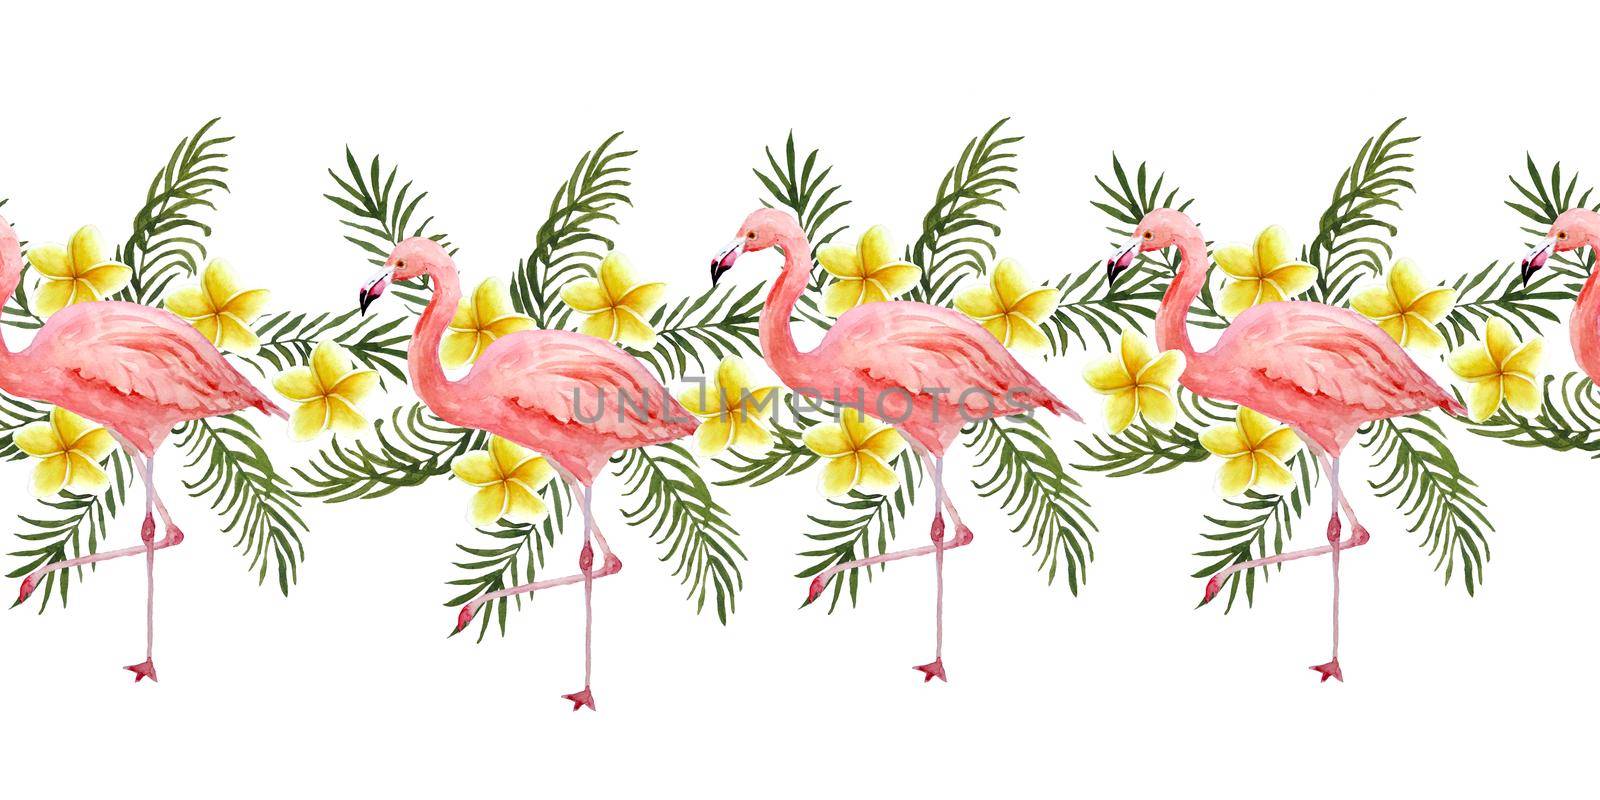 Watercolor hand drawn seamless horizontal border with pink flamingo bird and tropical green palm leaves plumeria frangipani flowers on background. Summer vacation holiday concept, card invitation